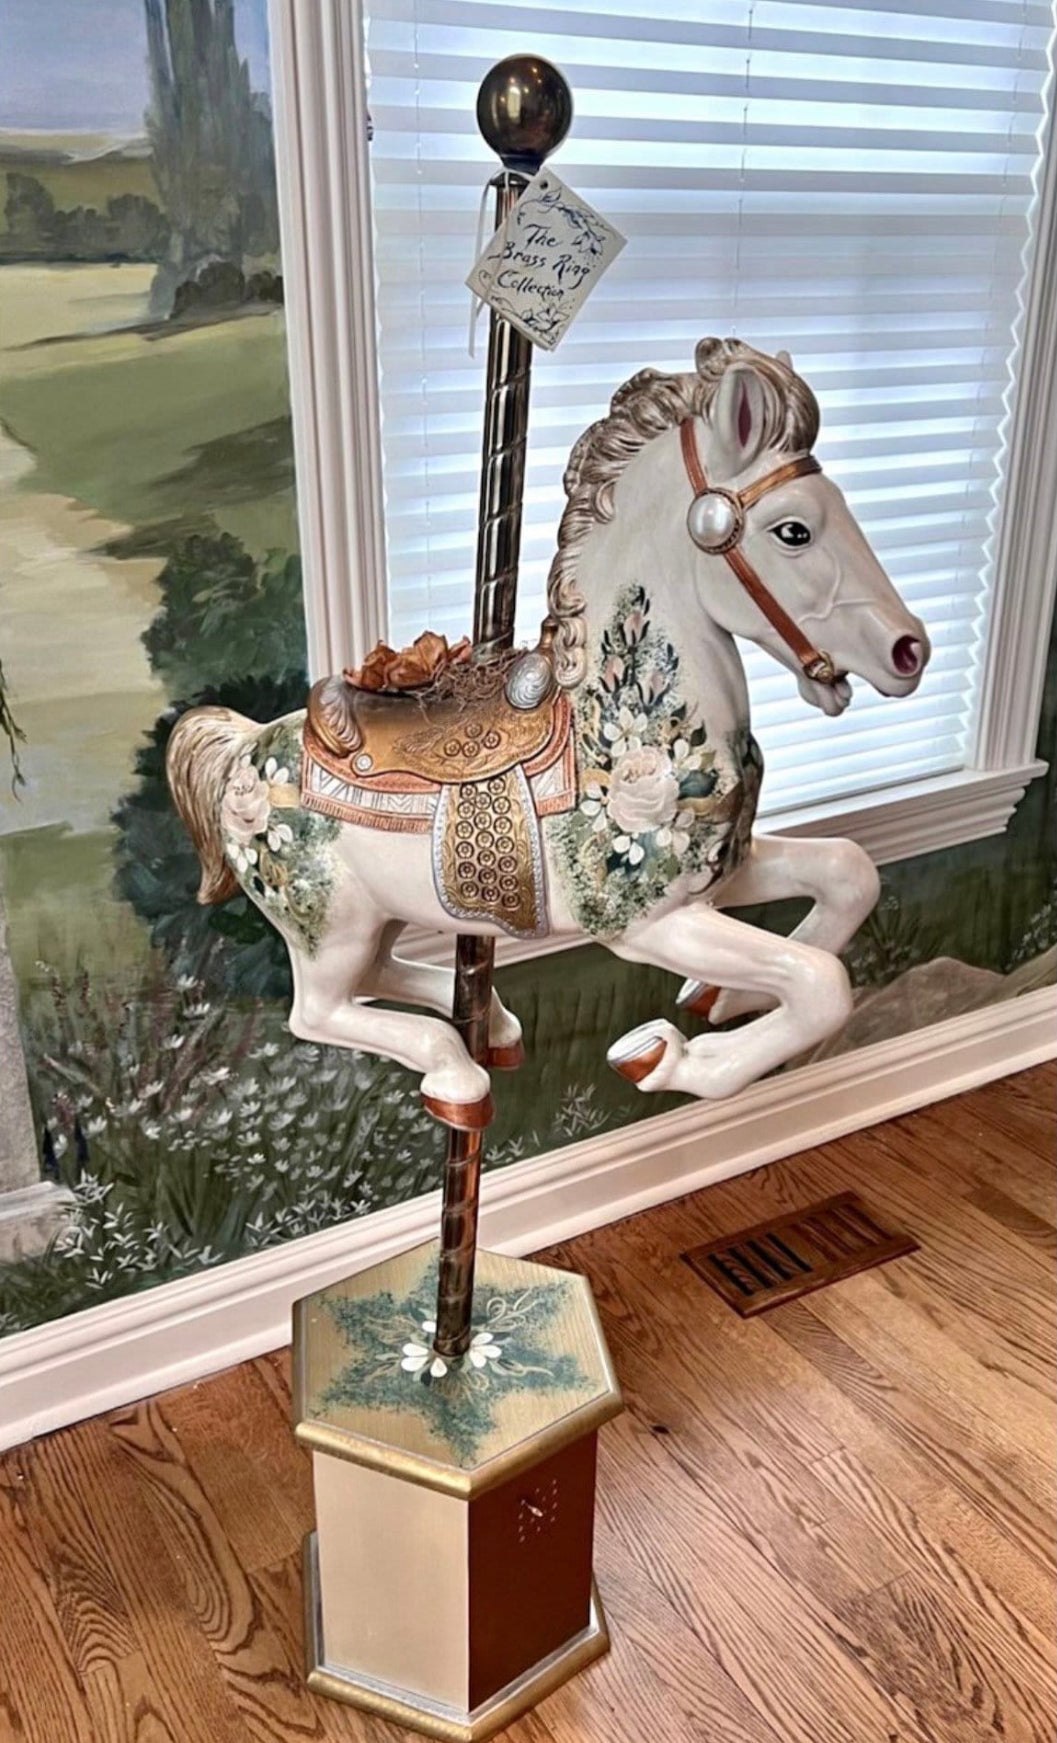 Life Size Carousel Horse For Rent / Floral Horse Prop for rent in NY/NJ